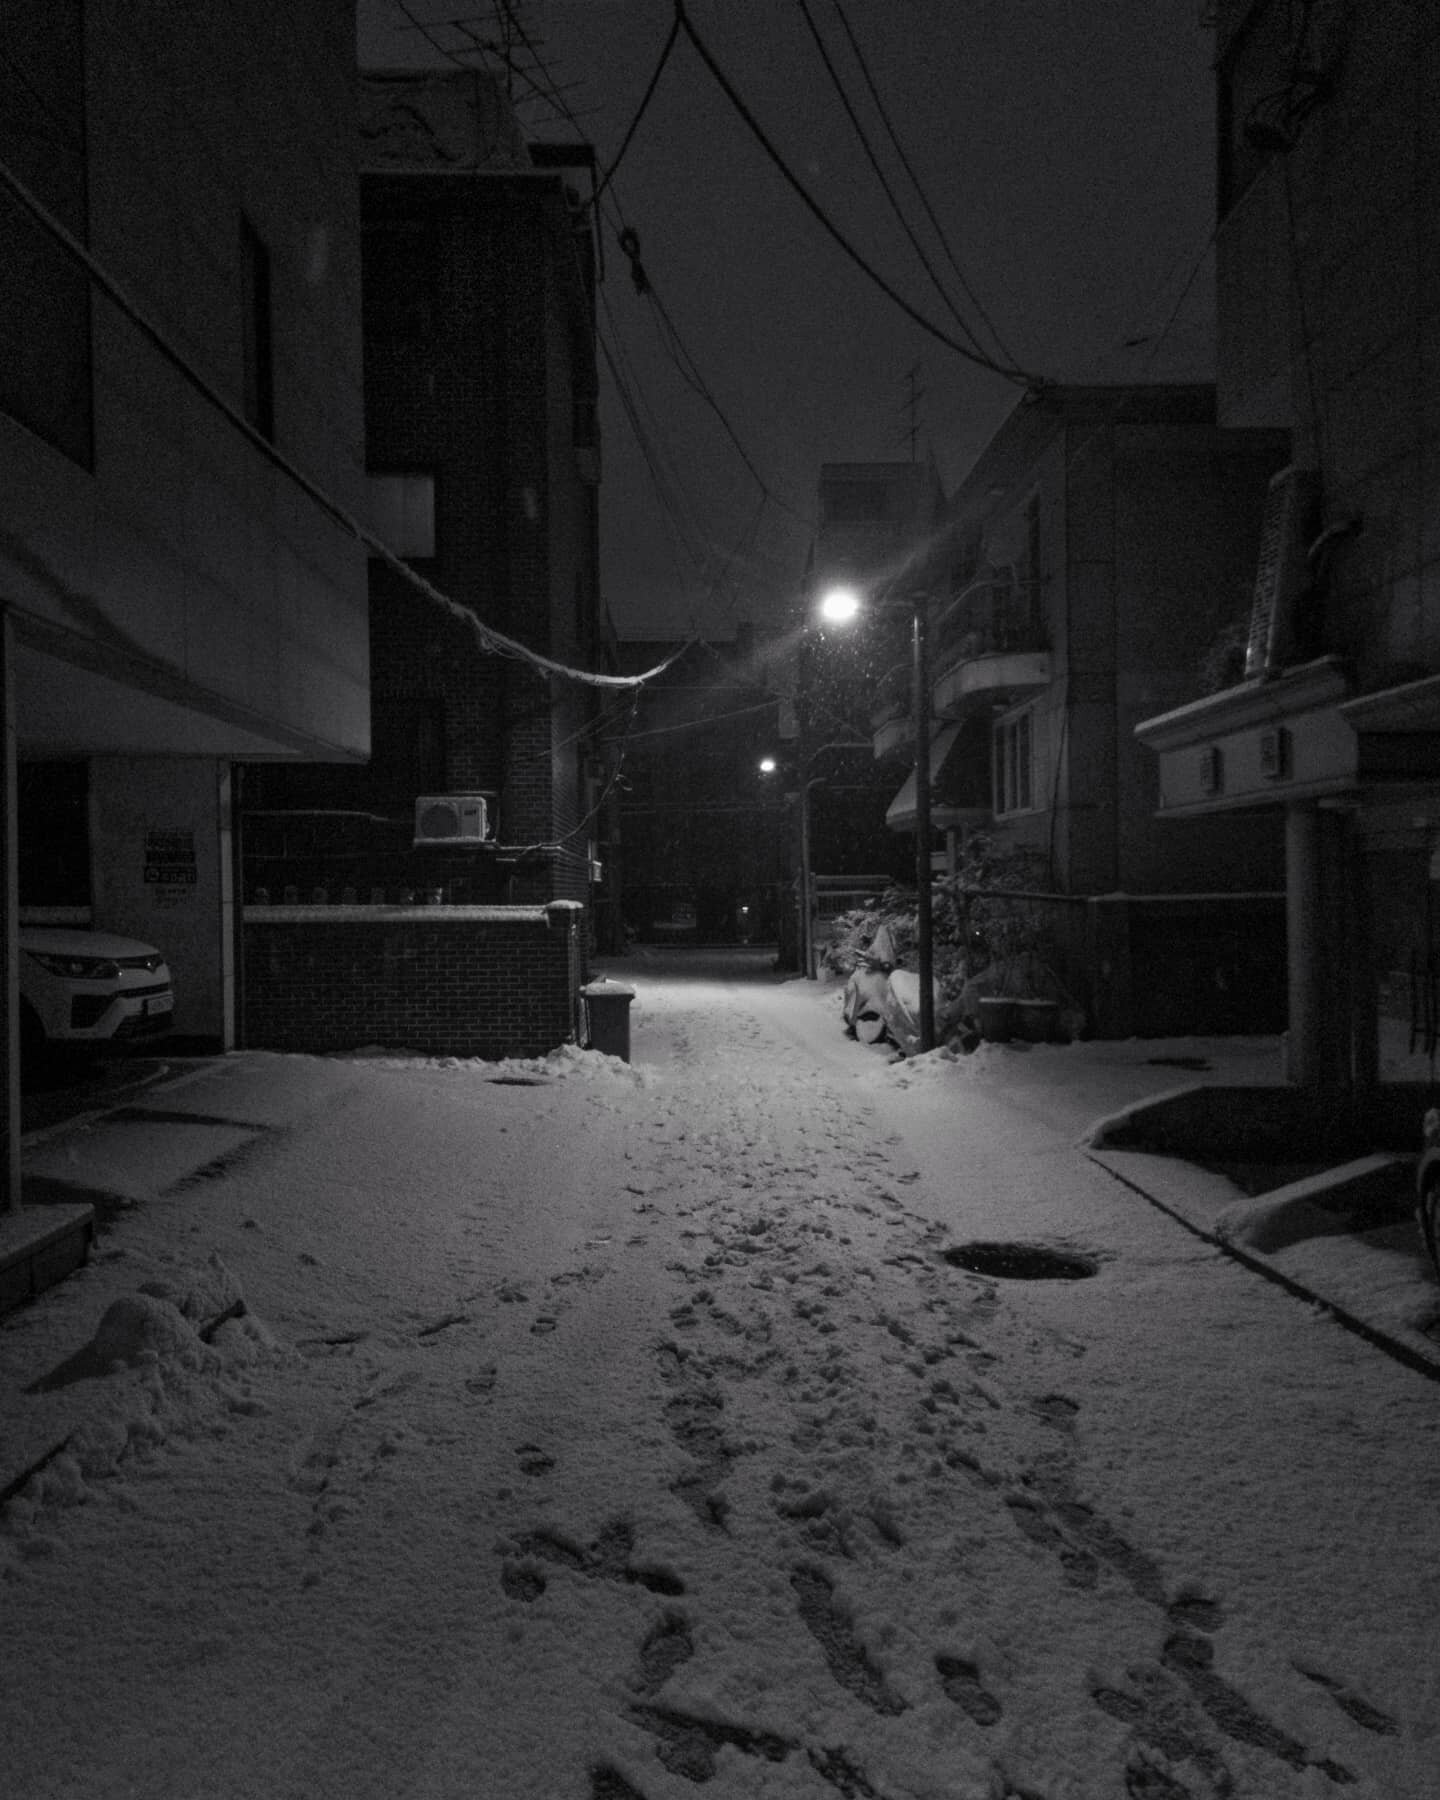 And the snow arrived as promised:) Seoul first snow.